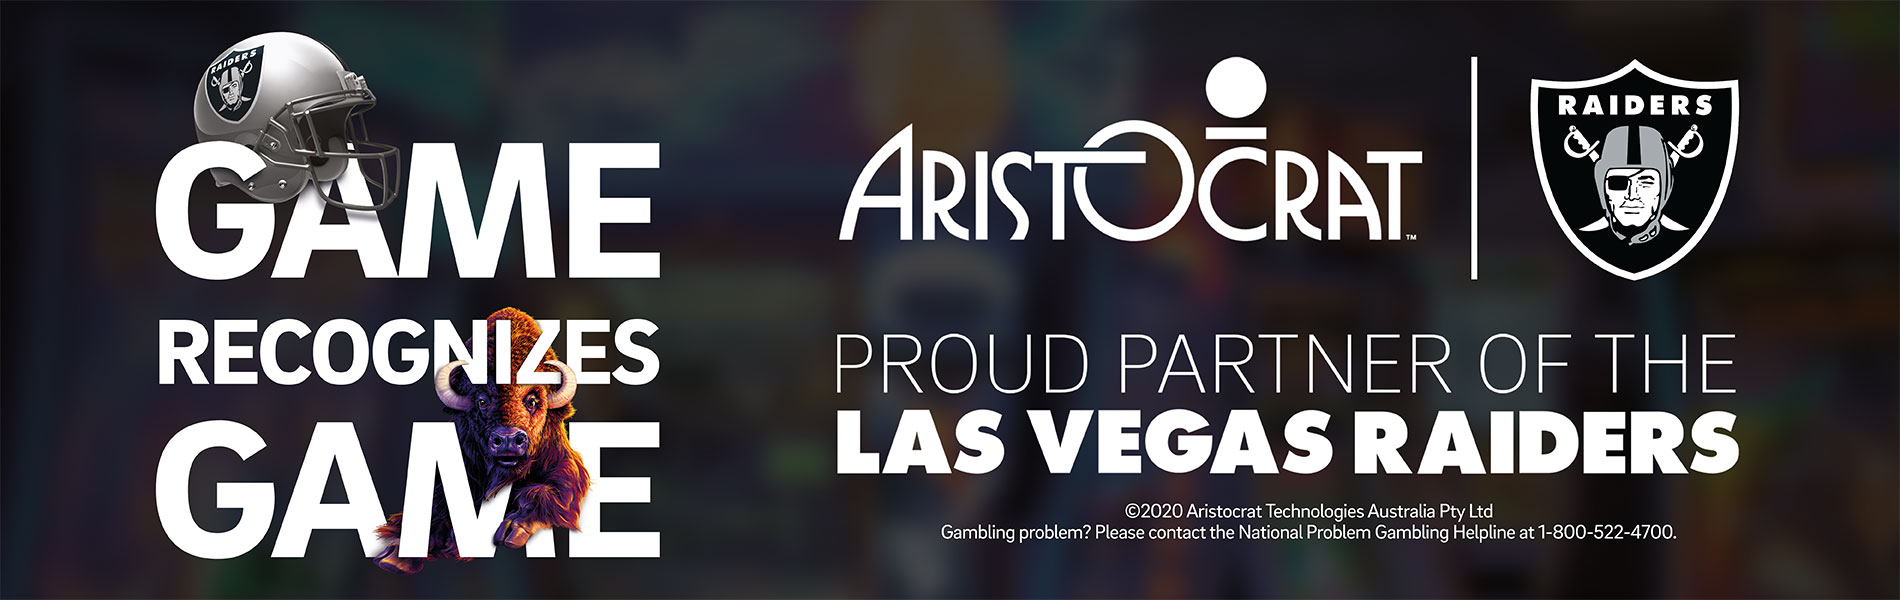 Aristocrat Technologies, Inc Named an Official Partner of the Las